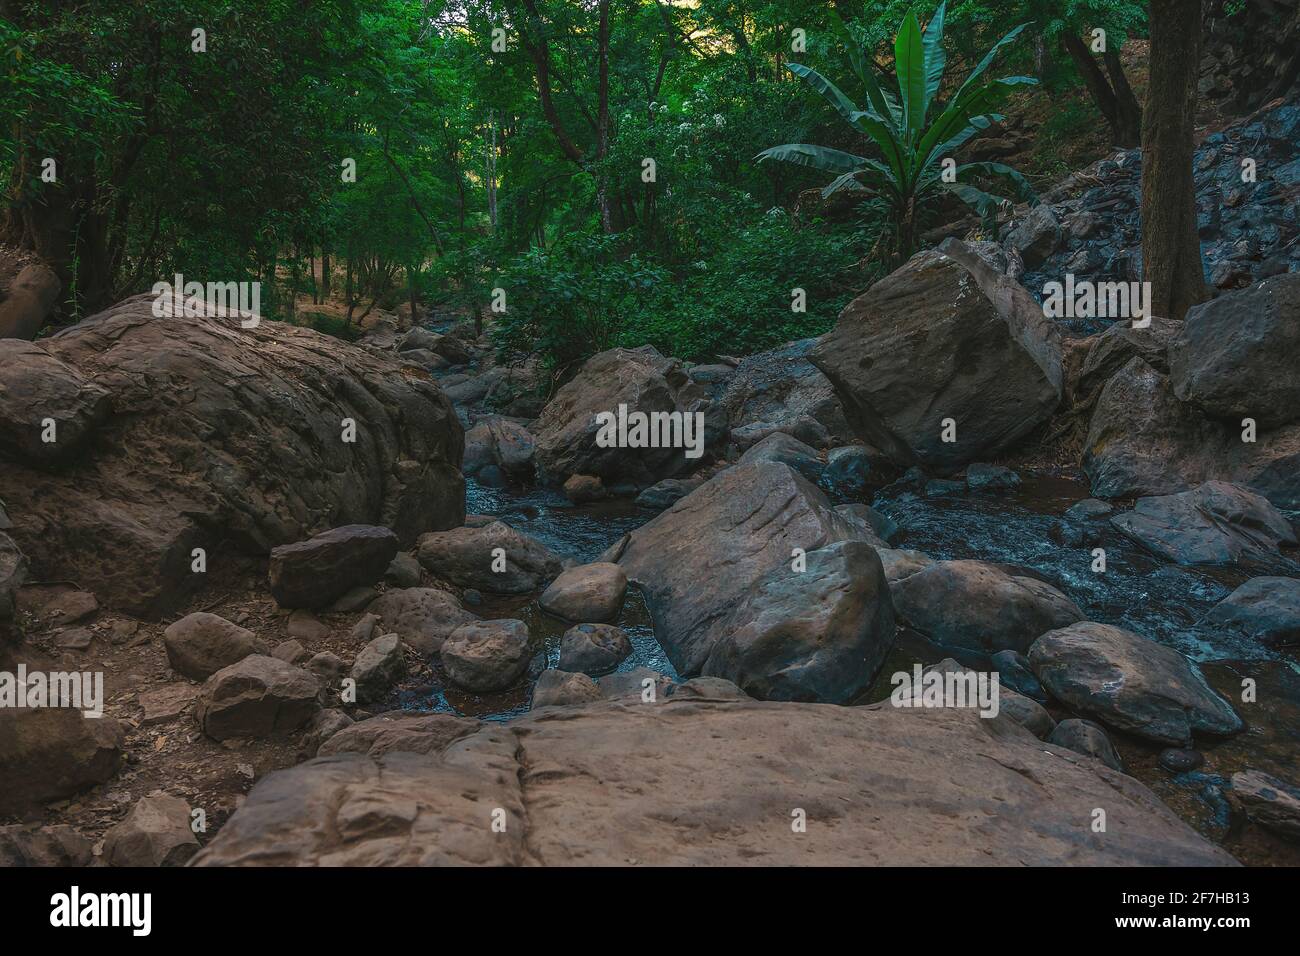 The wild landscape of a rivers with rocks. The river flows through the fall of the Velo de Novia waterfall. View of the rocks of the forest river in t Stock Photo